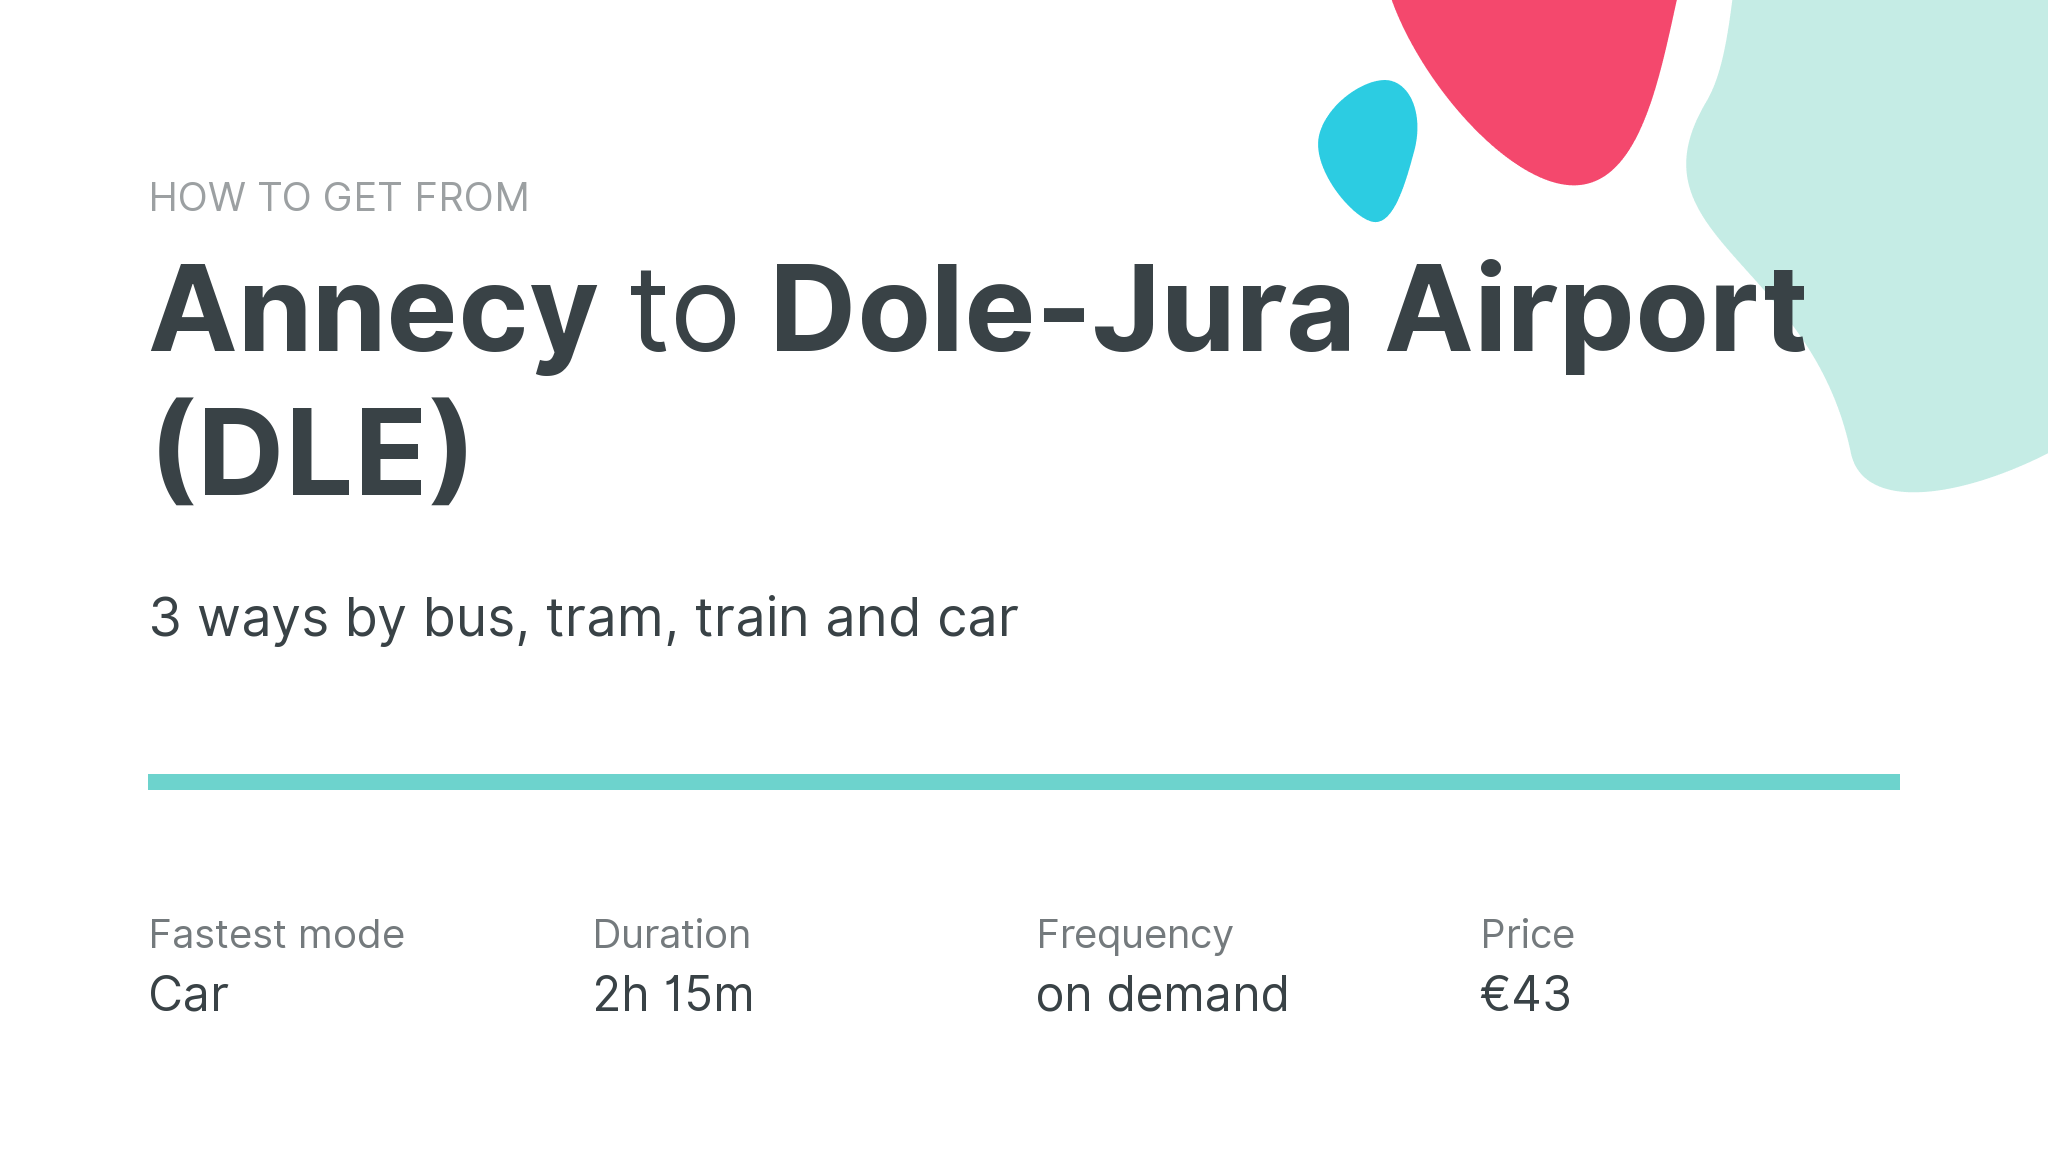 How do I get from Annecy to Dole-Jura Airport (DLE)